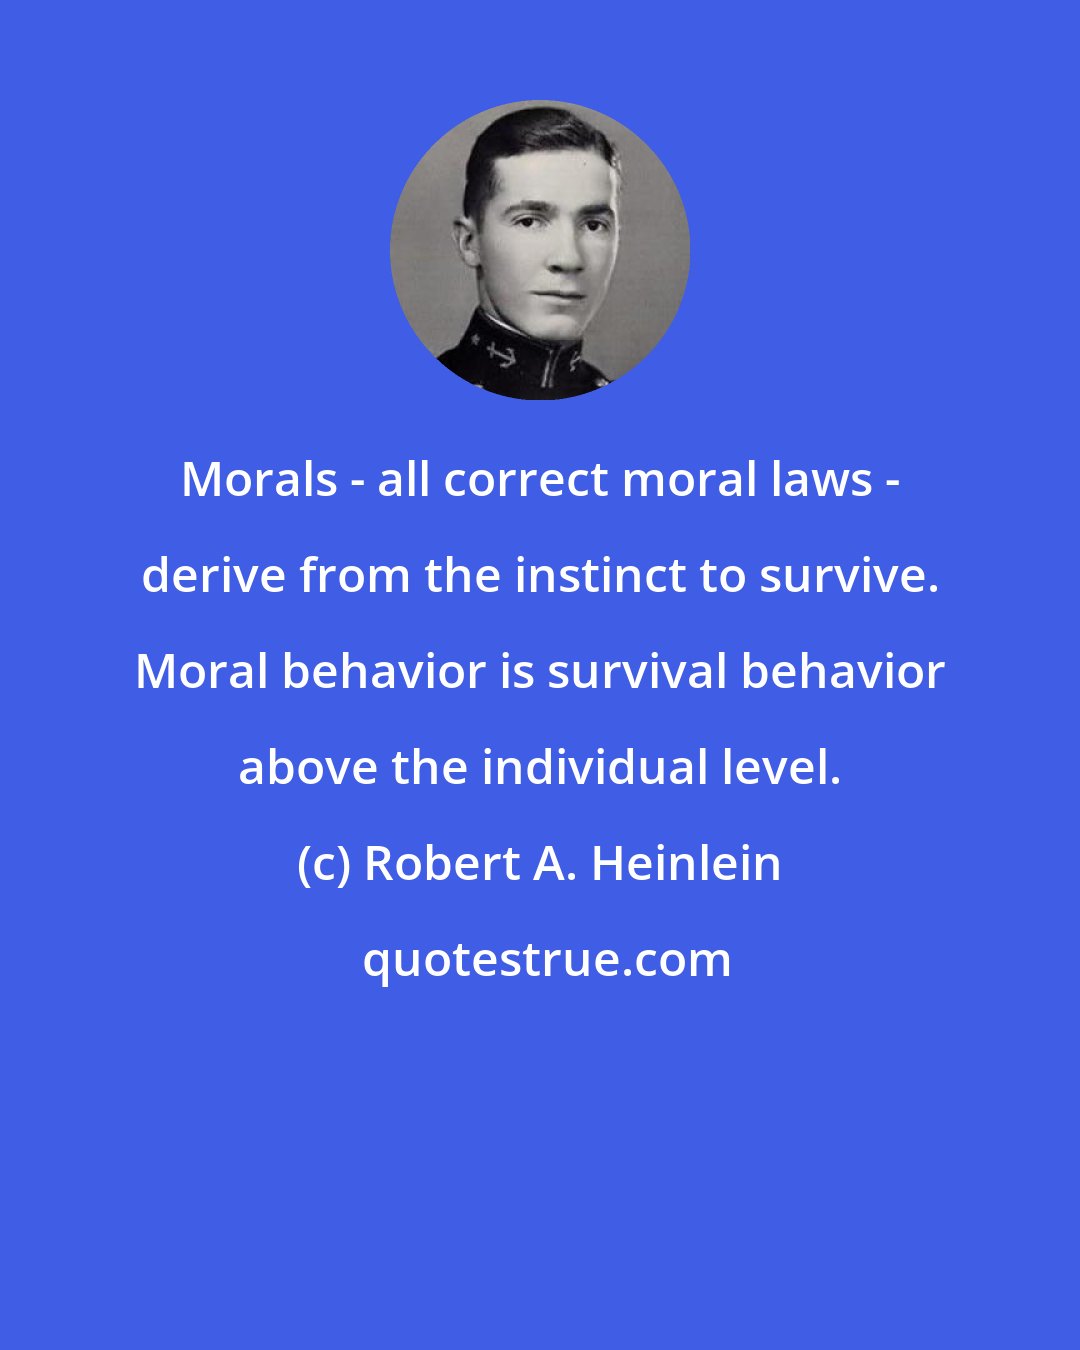 Robert A. Heinlein: Morals - all correct moral laws - derive from the instinct to survive. Moral behavior is survival behavior above the individual level.